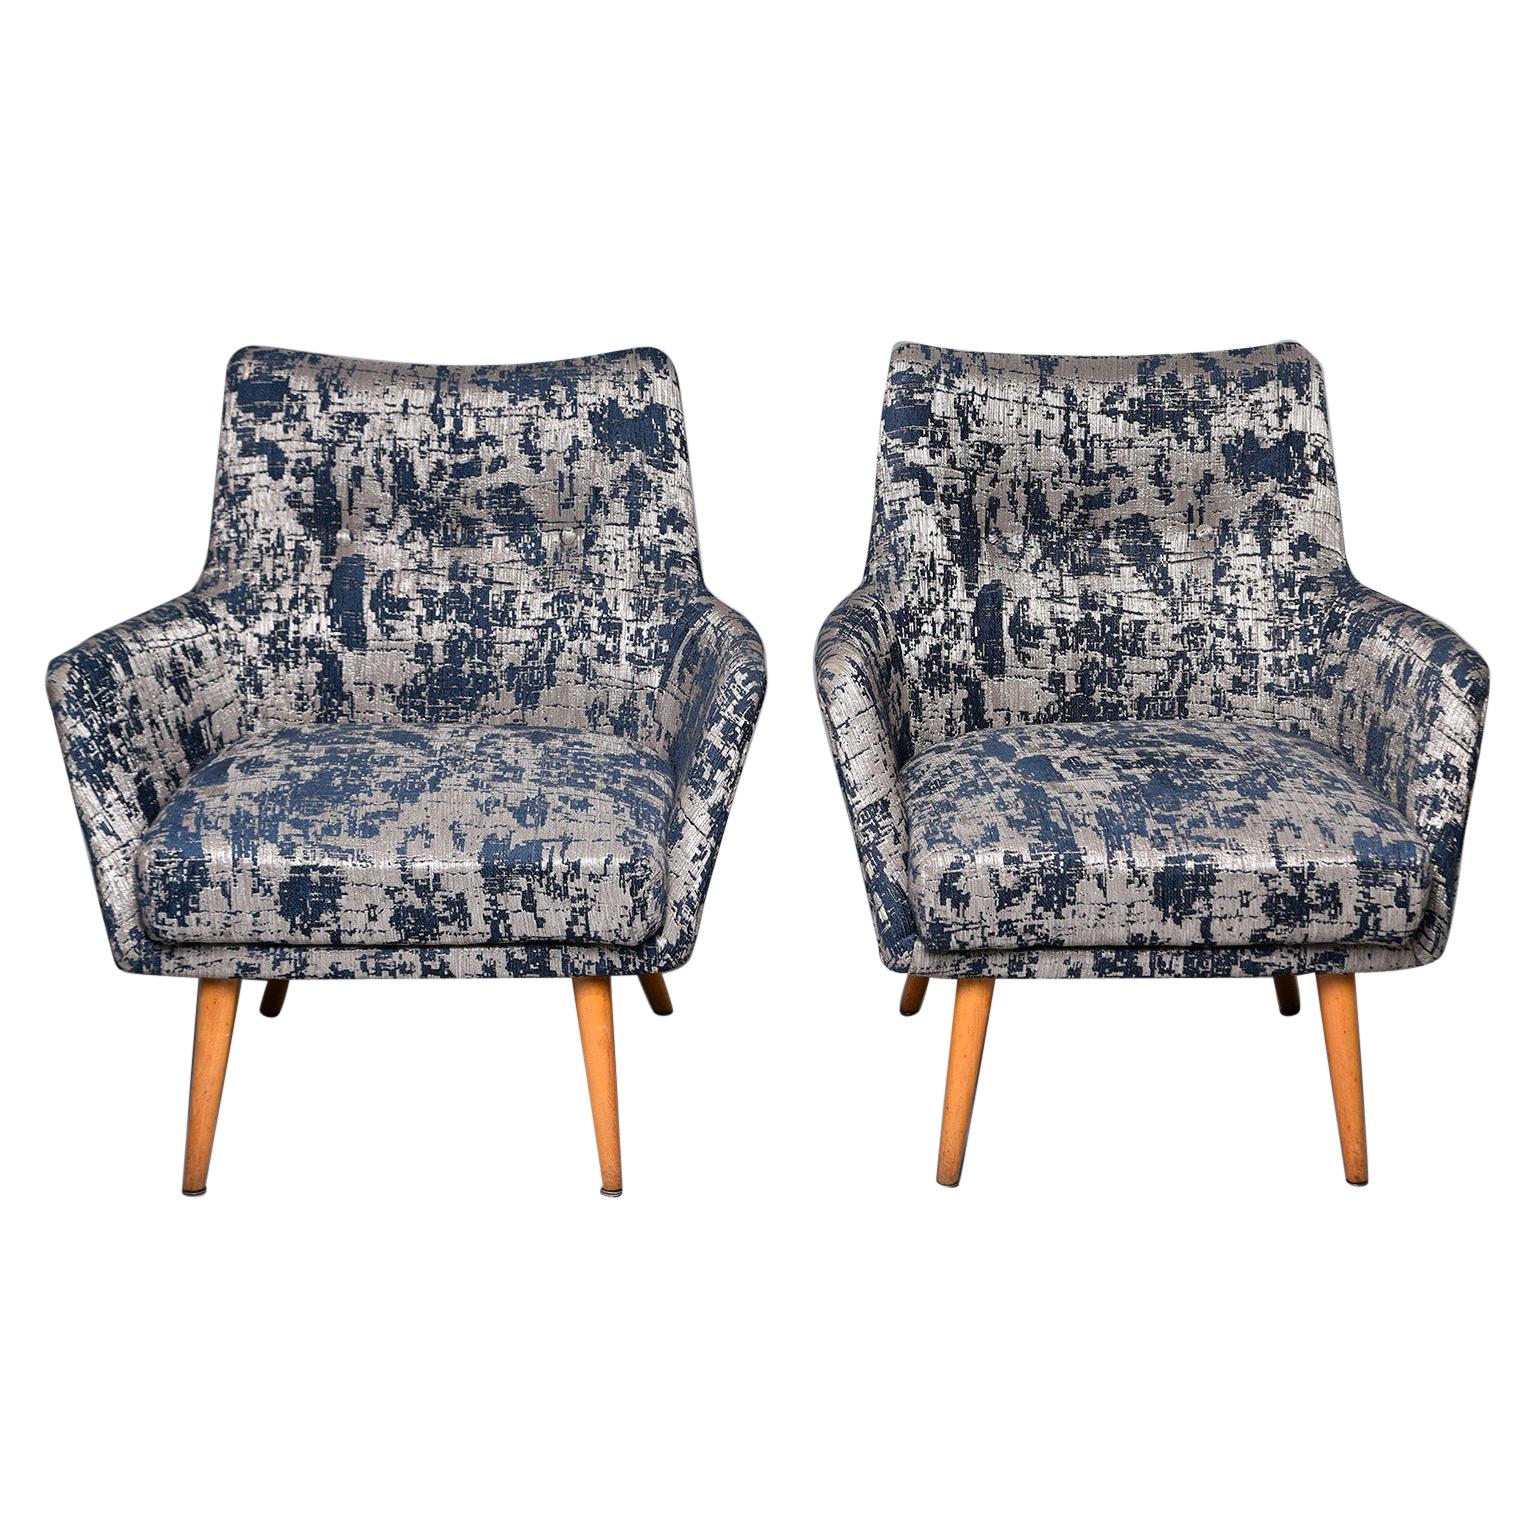 Pair of Italian Midcentury Armchairs with Blue and Silver Upholstery